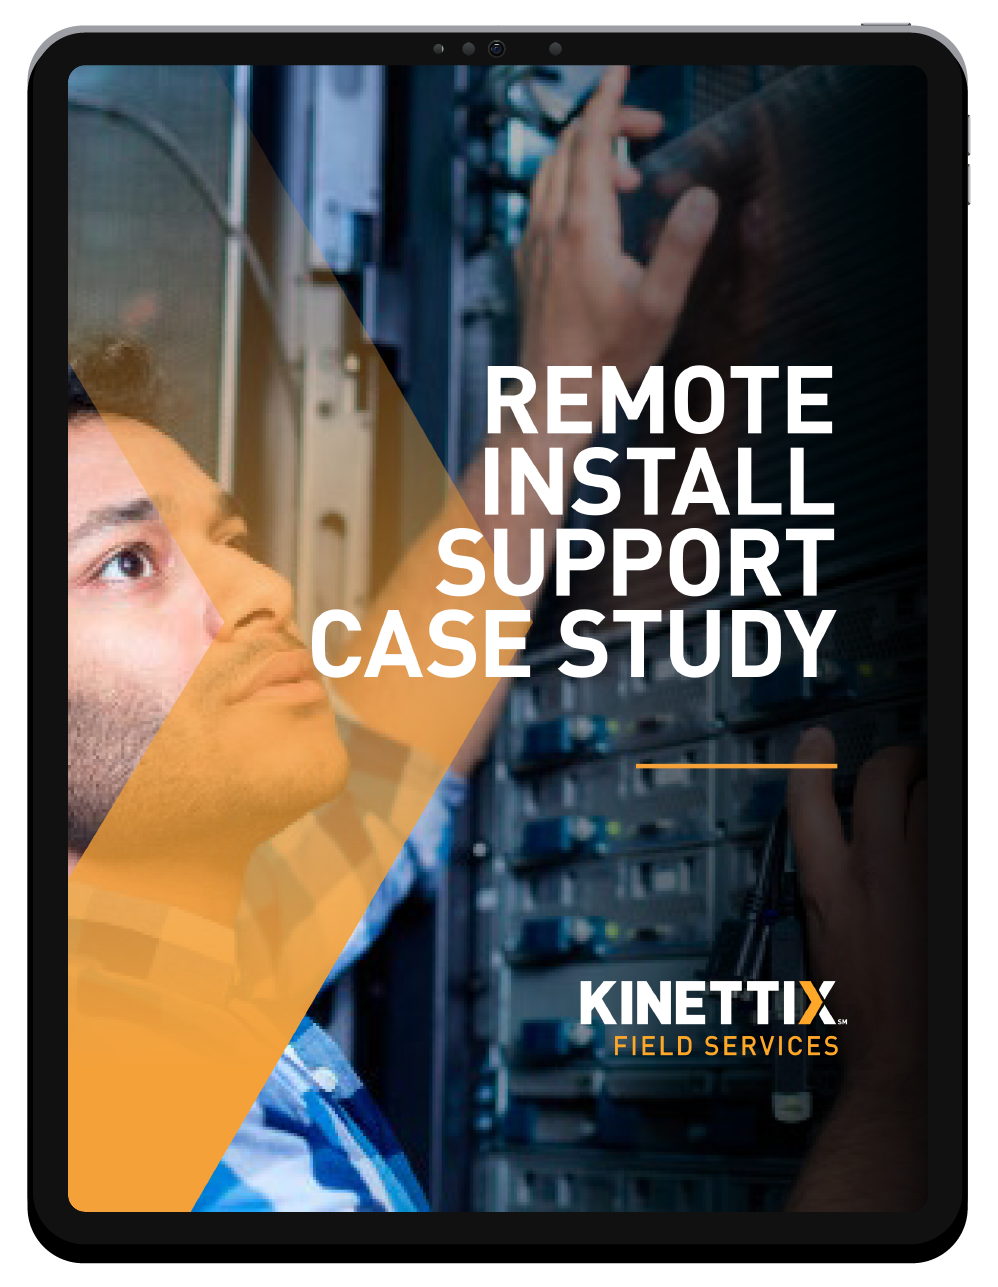 KNTX_Remote-Install-Support-Case-Study-tabletx1_2023